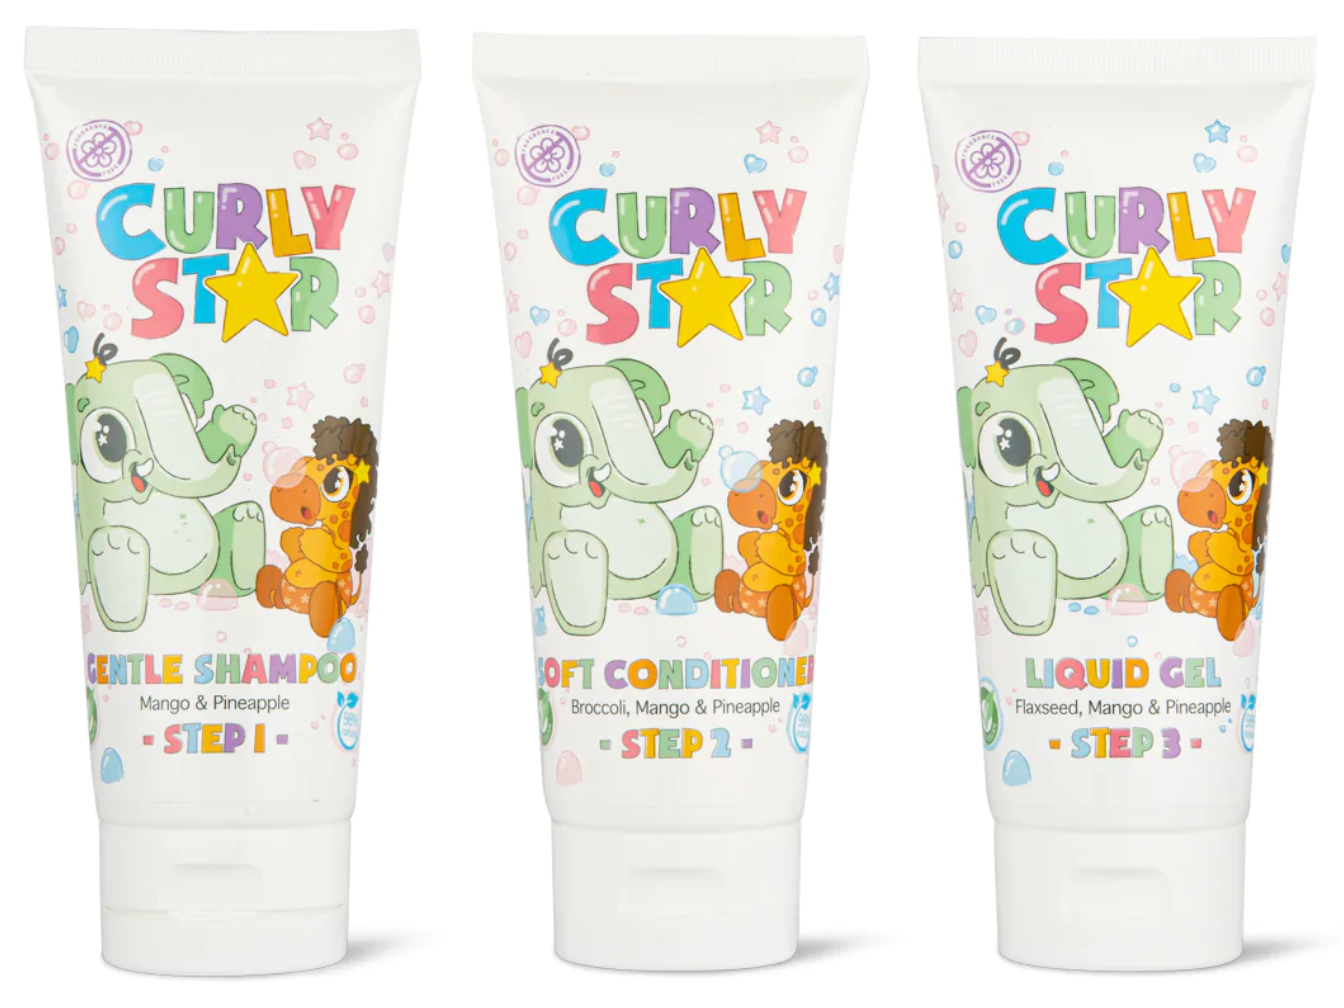 Curly Star - Bundle set Fragrance Free - 3 products